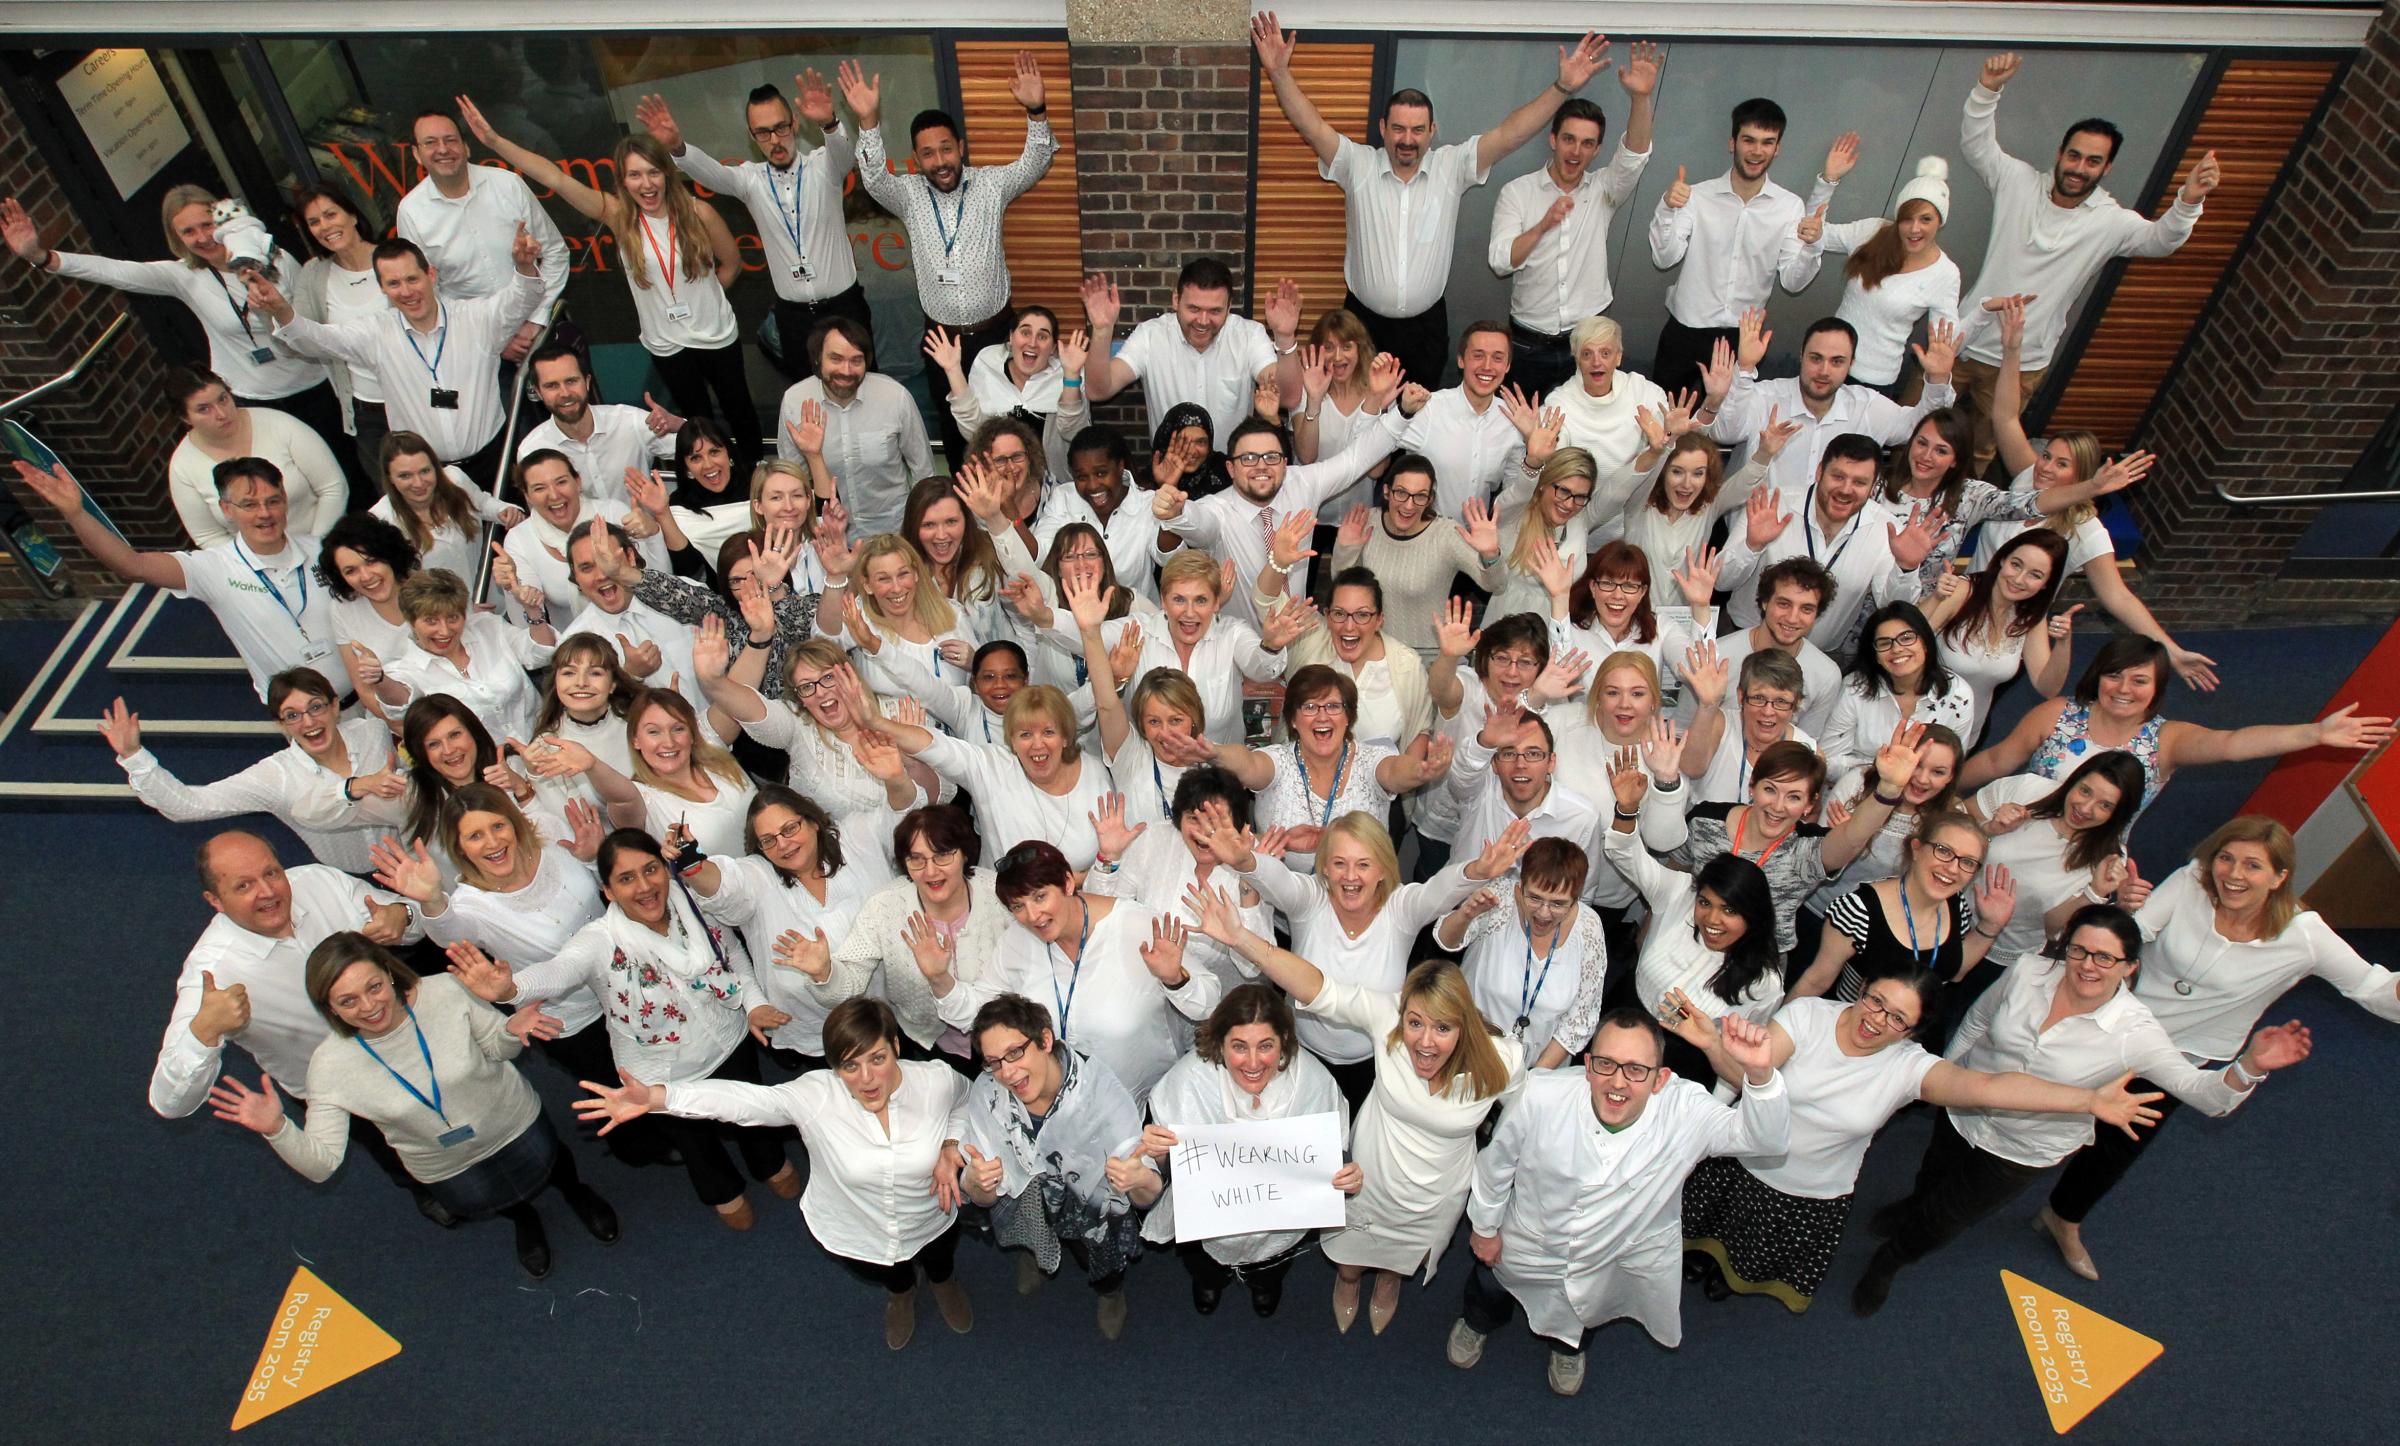 Southampton University staff wear white in cancer fight